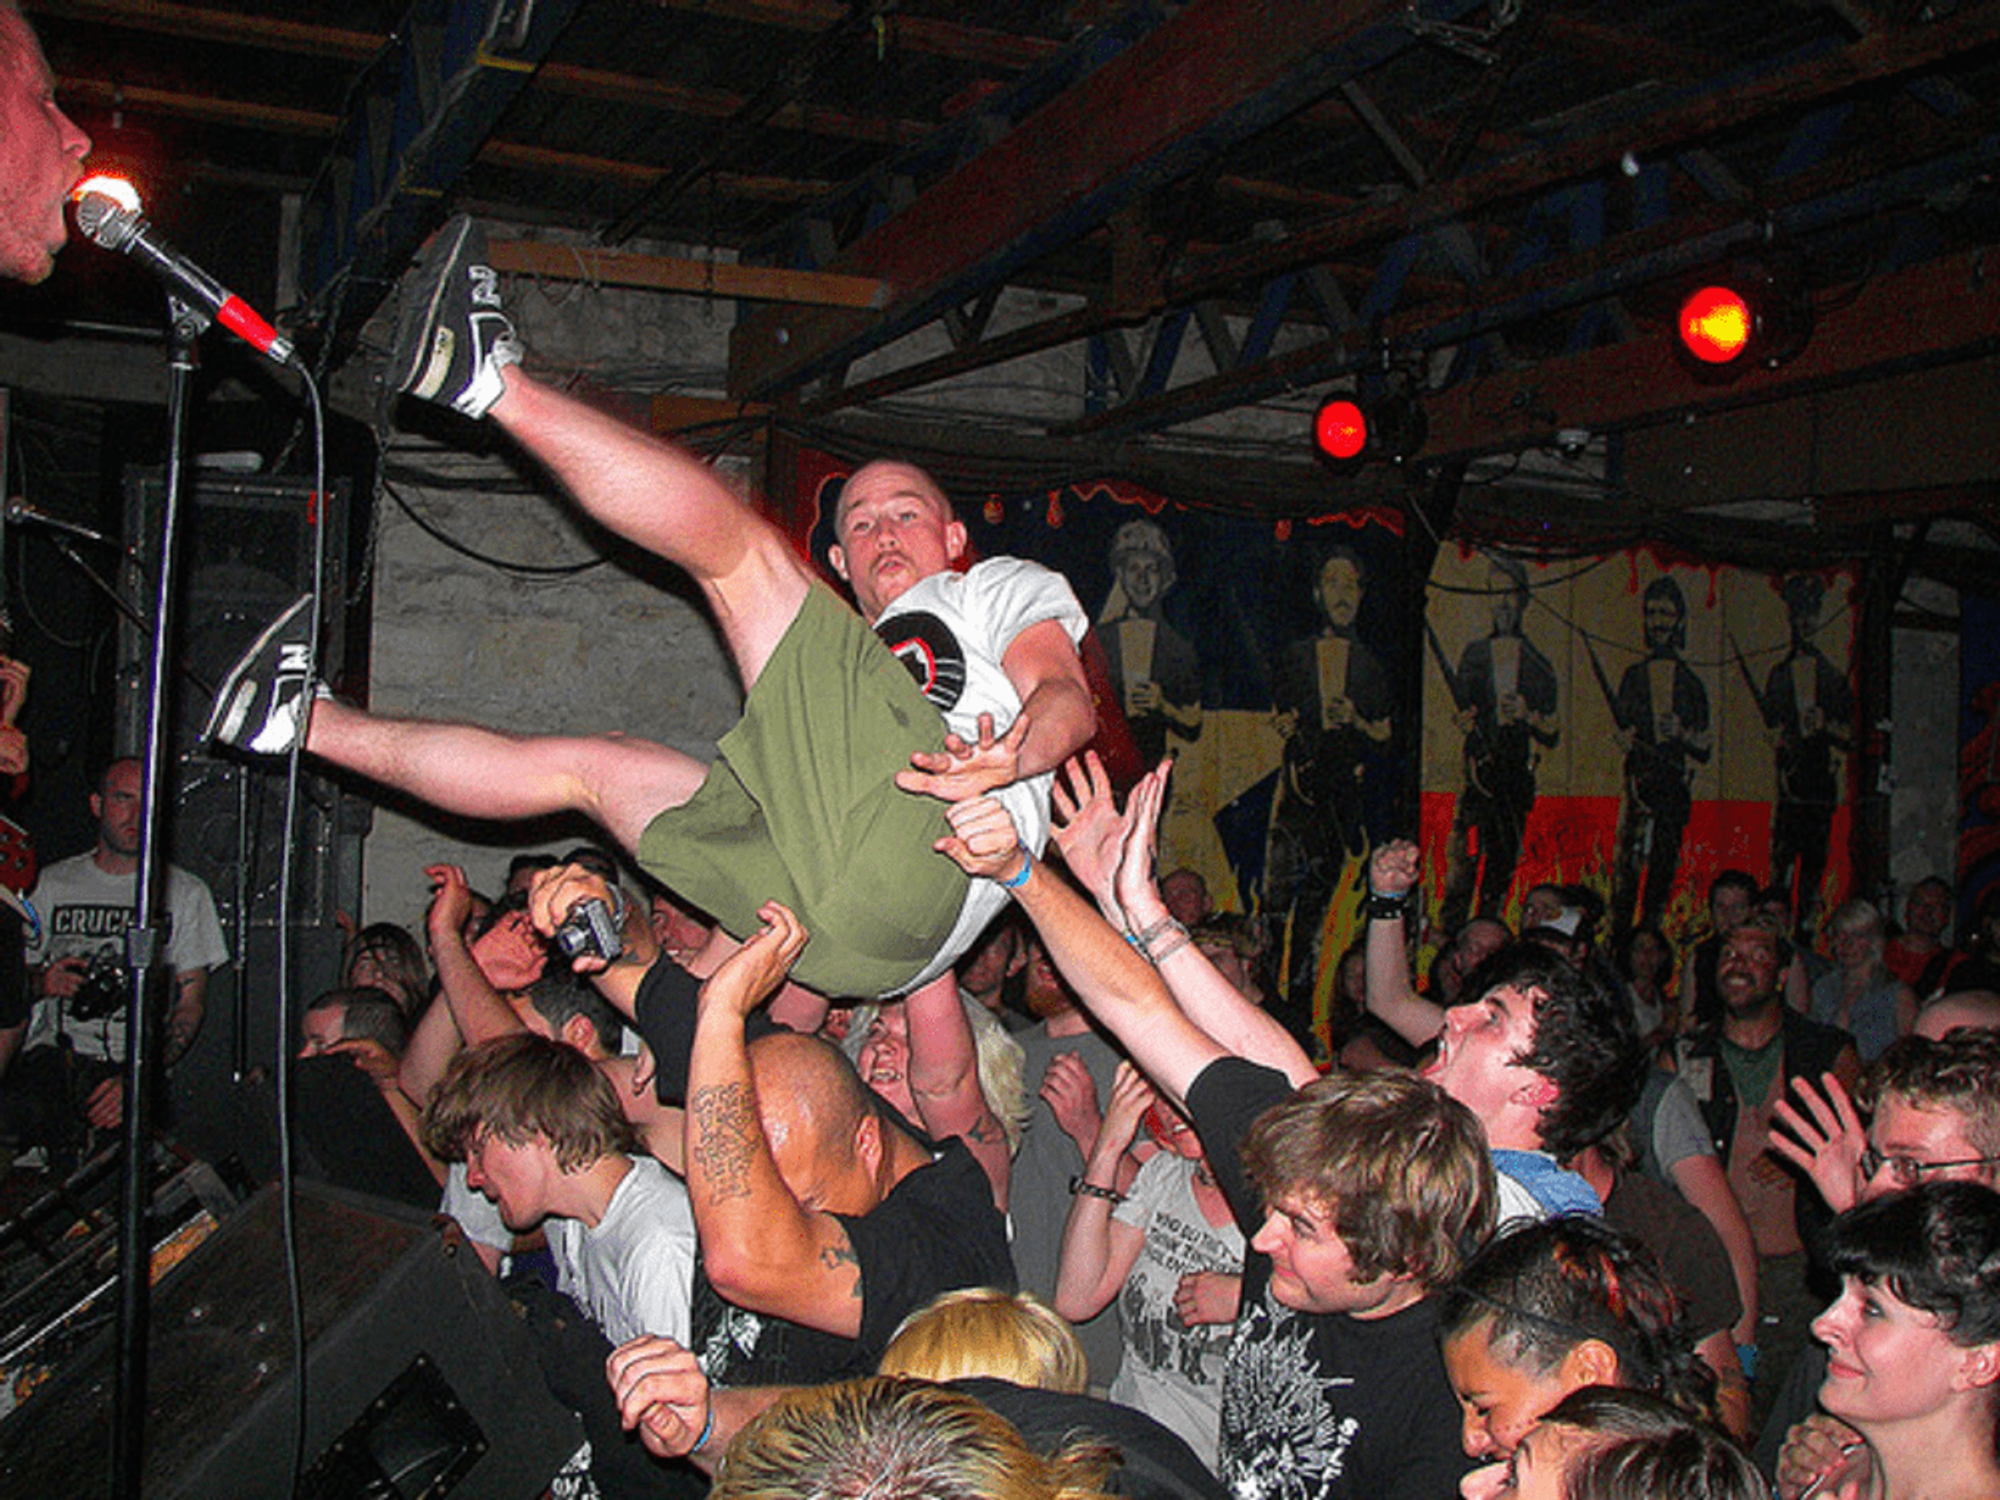 A fan crowd surfs at a Hjertestop Chaos in Tejas show in 2009.